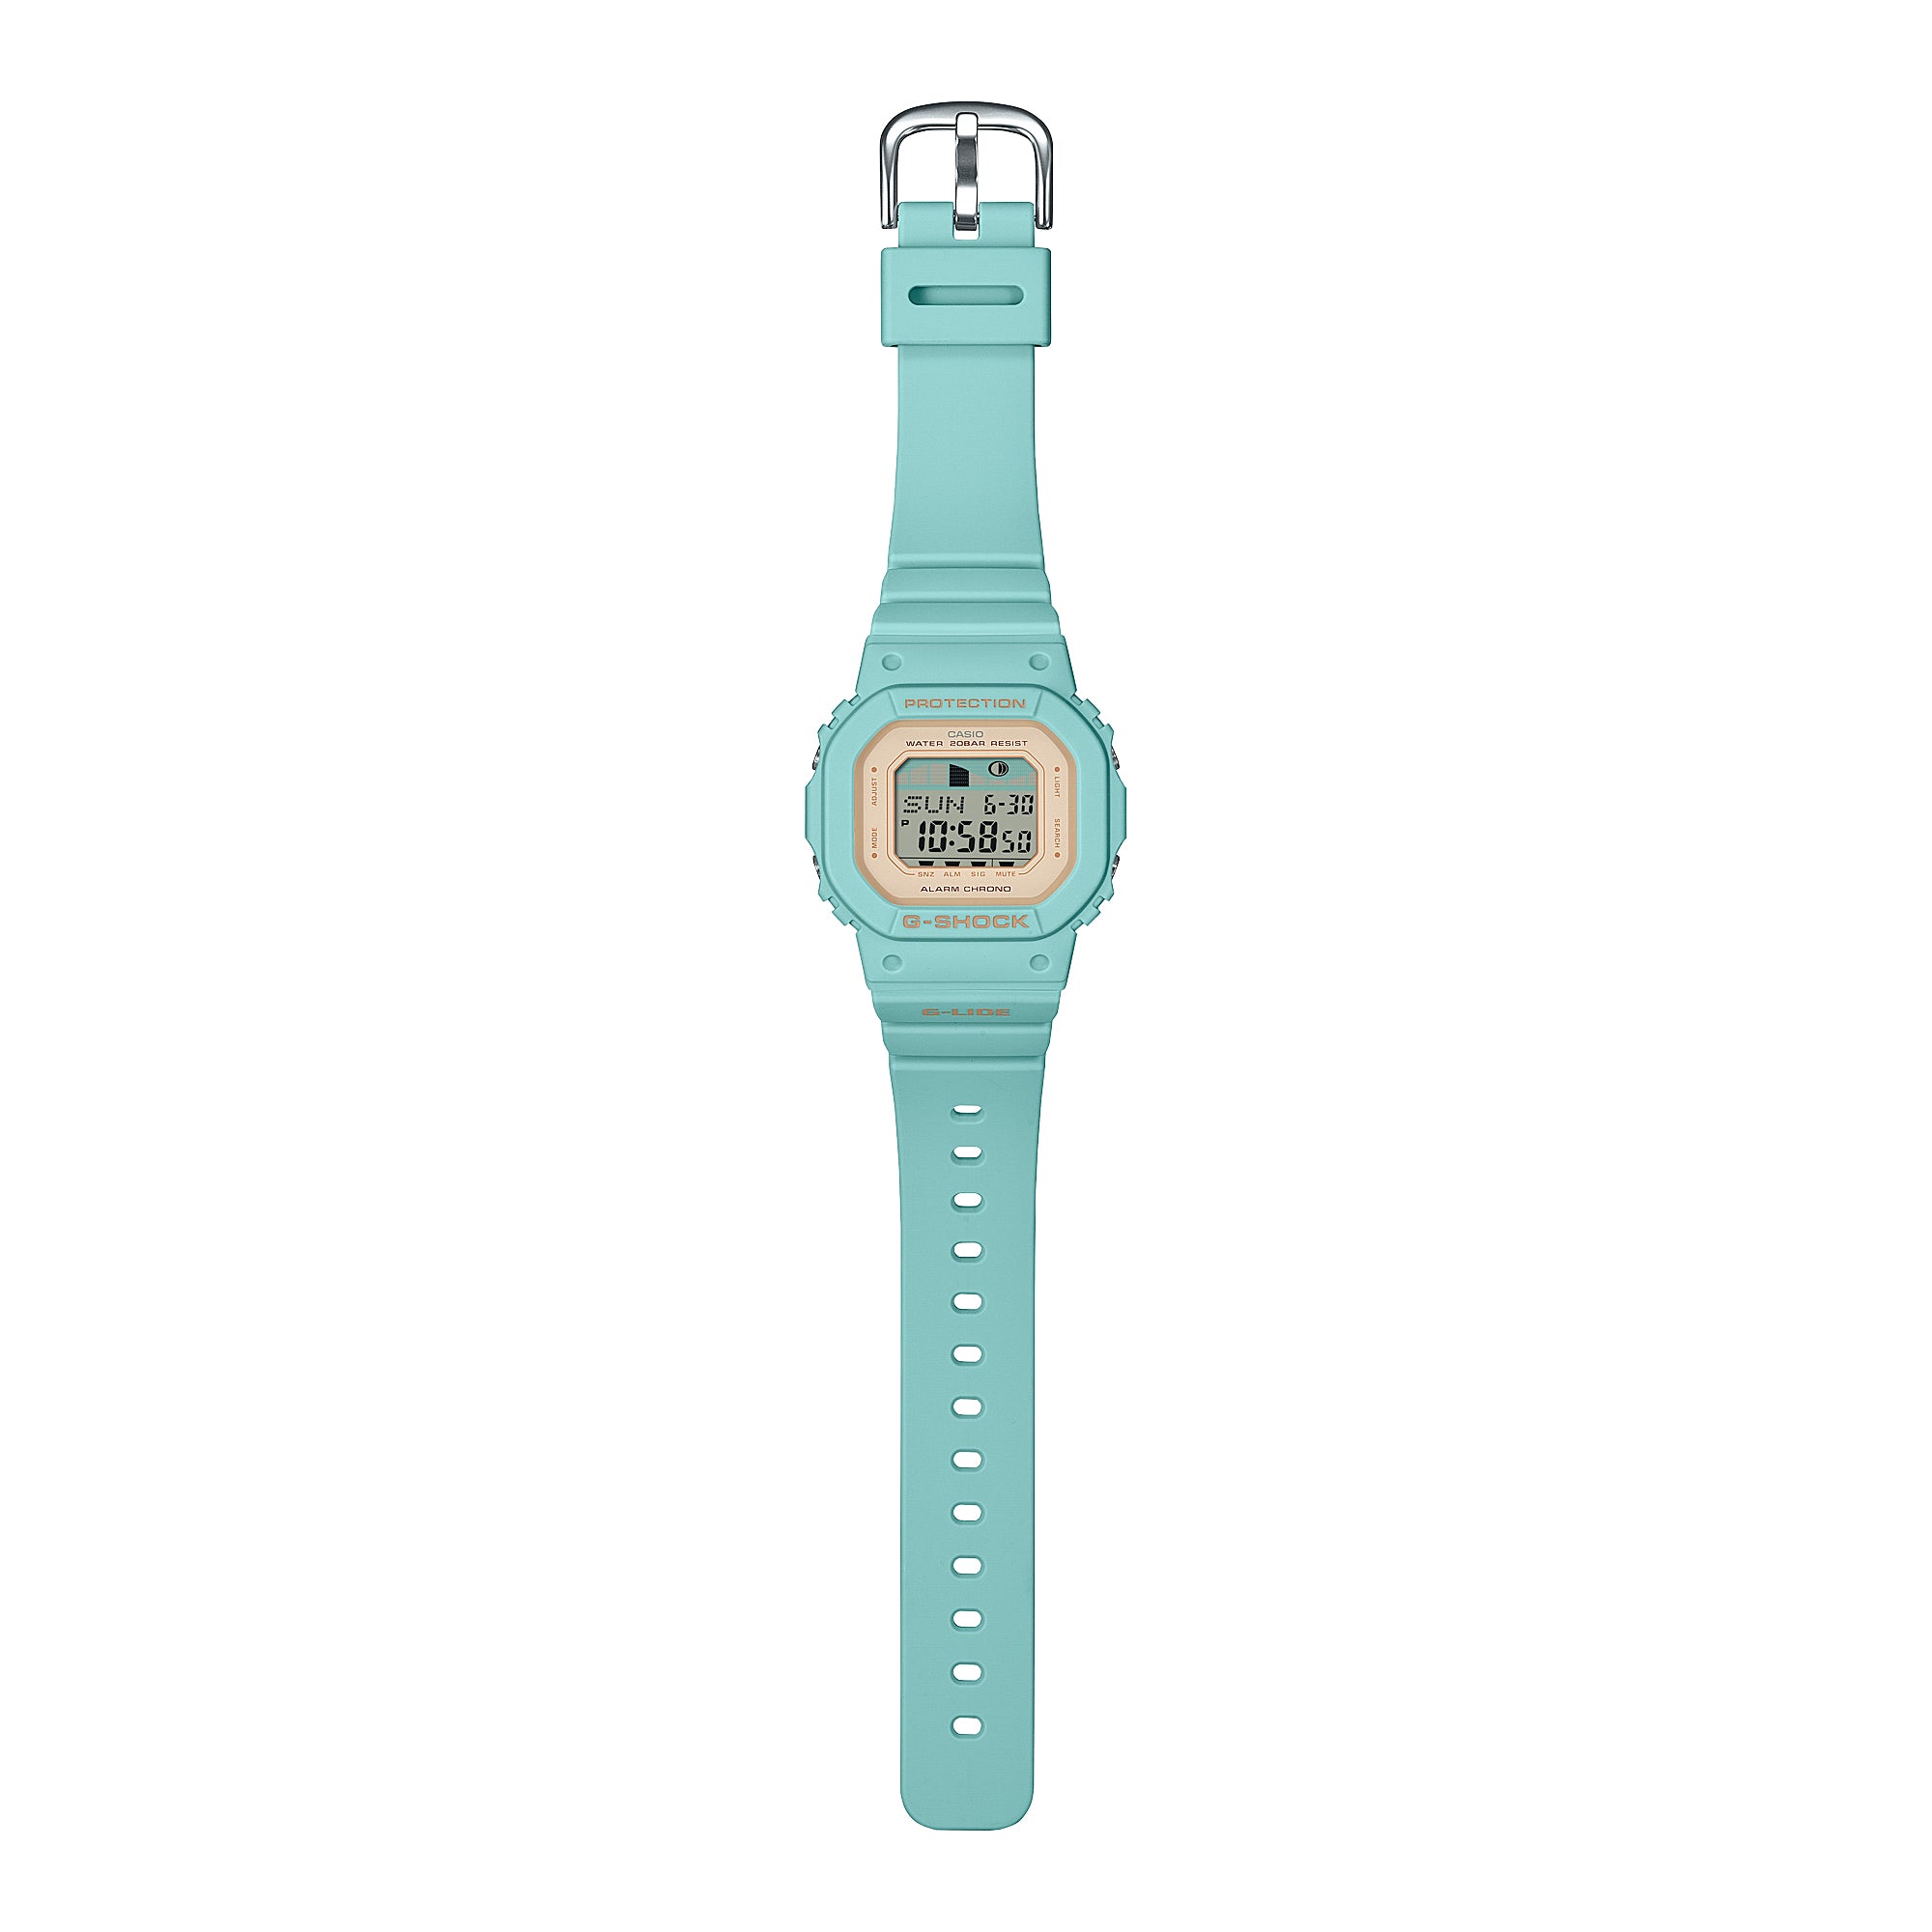 Casio G-Shock for Ladies' G-LIDE Eco-Friendly Bio-Based Mint Green Resin Band Watch GLXS5600-3D GLX-S5600-3D GLX-S5600-3